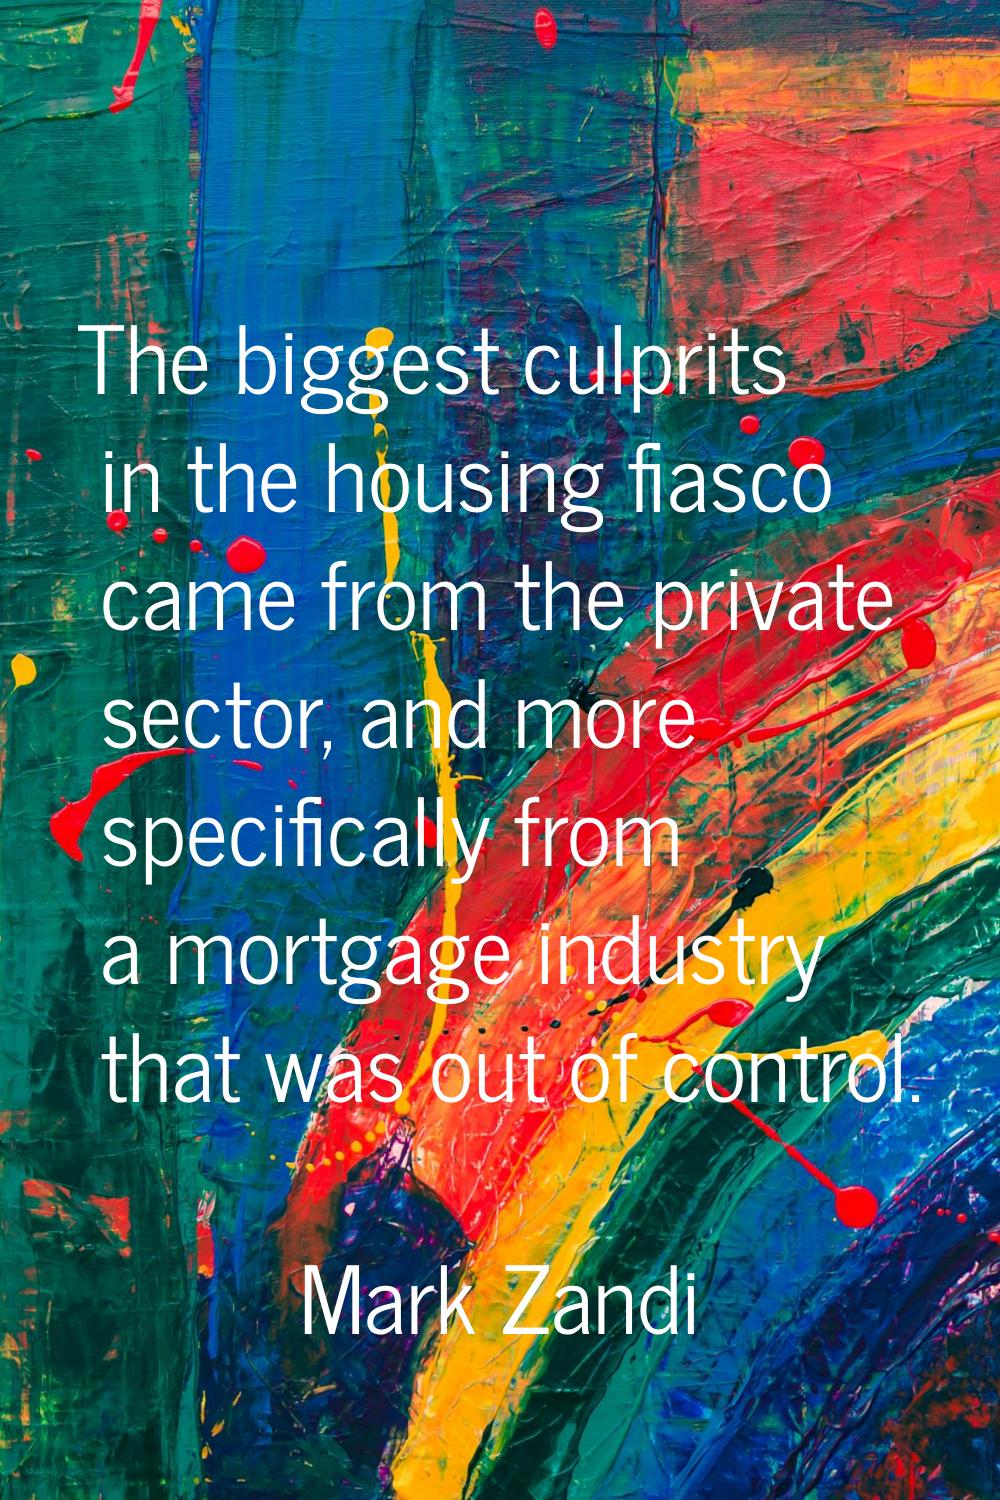 The biggest culprits in the housing fiasco came from the private sector, and more specifically from